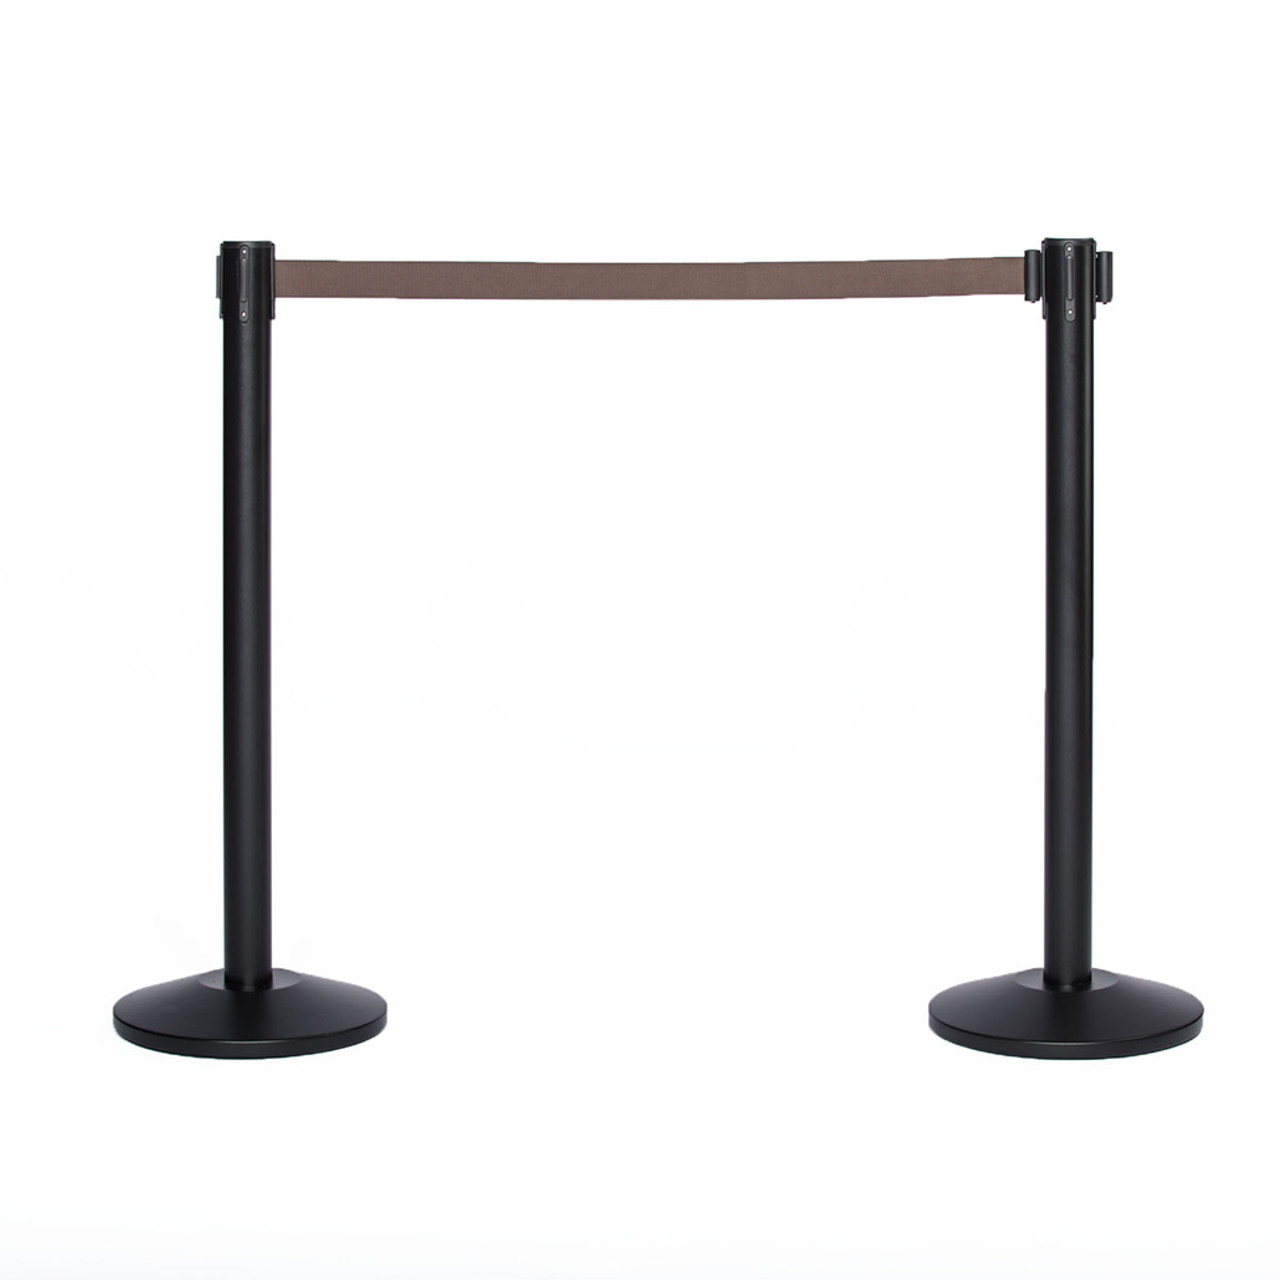 Best Reviewed Pair of Black Retractable Belt Stanchions with a 10' Brown Belt